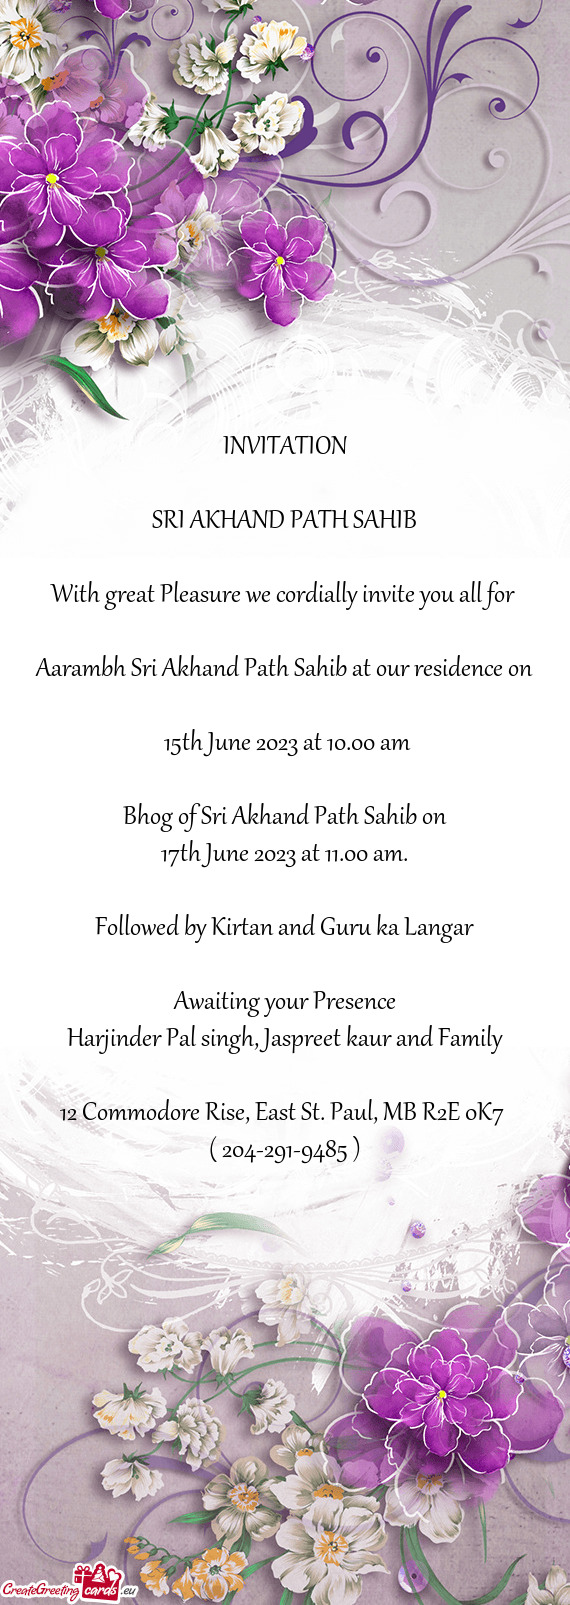 Aarambh Sri Akhand Path Sahib at our residence on 15th June 2023 at 10.00 am